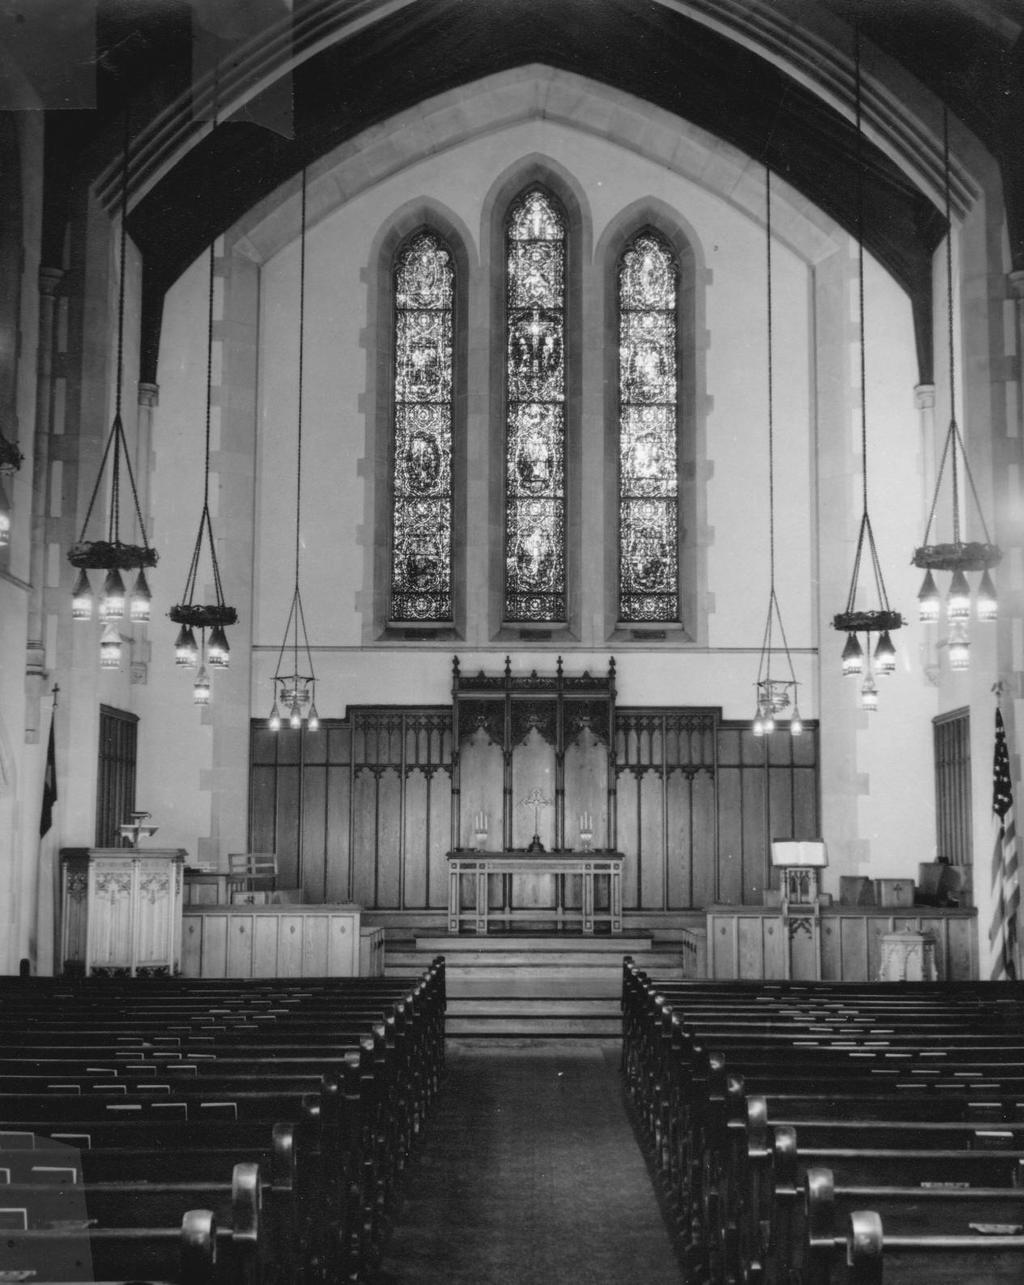 In 1945 an extensive renovation plan (Click for actual list) was developed including about every room within the church.